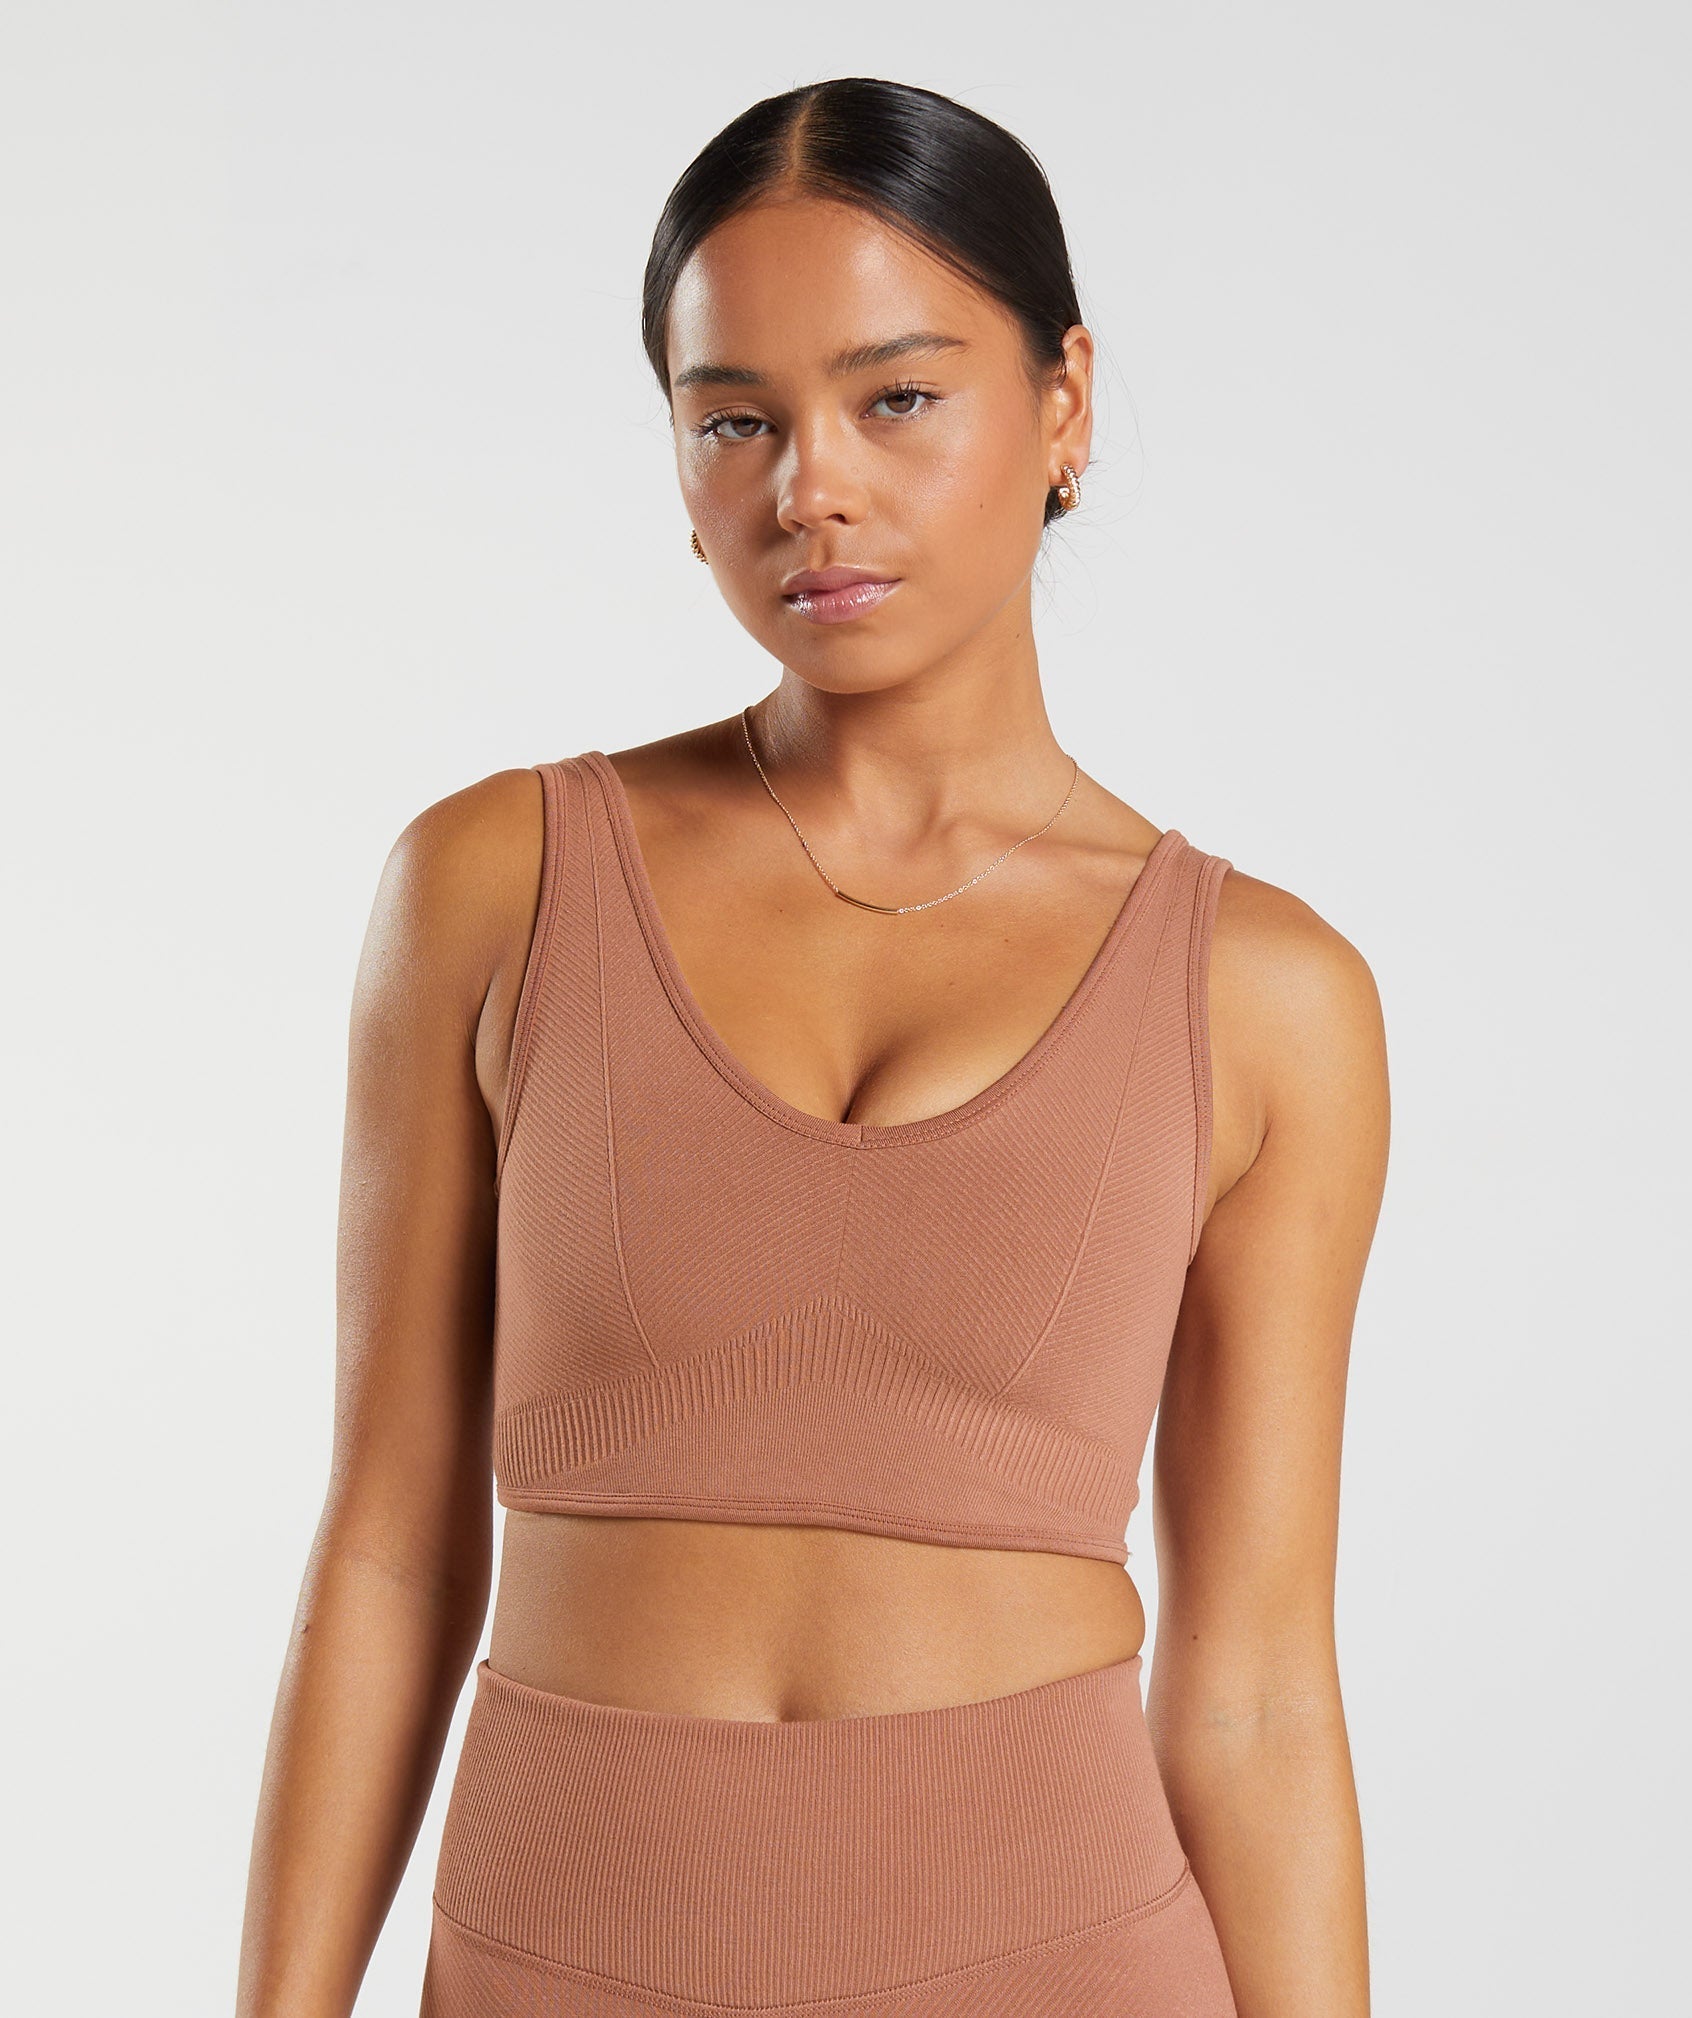 Rest Day Seamless Bralette in Coffee Brown - view 1